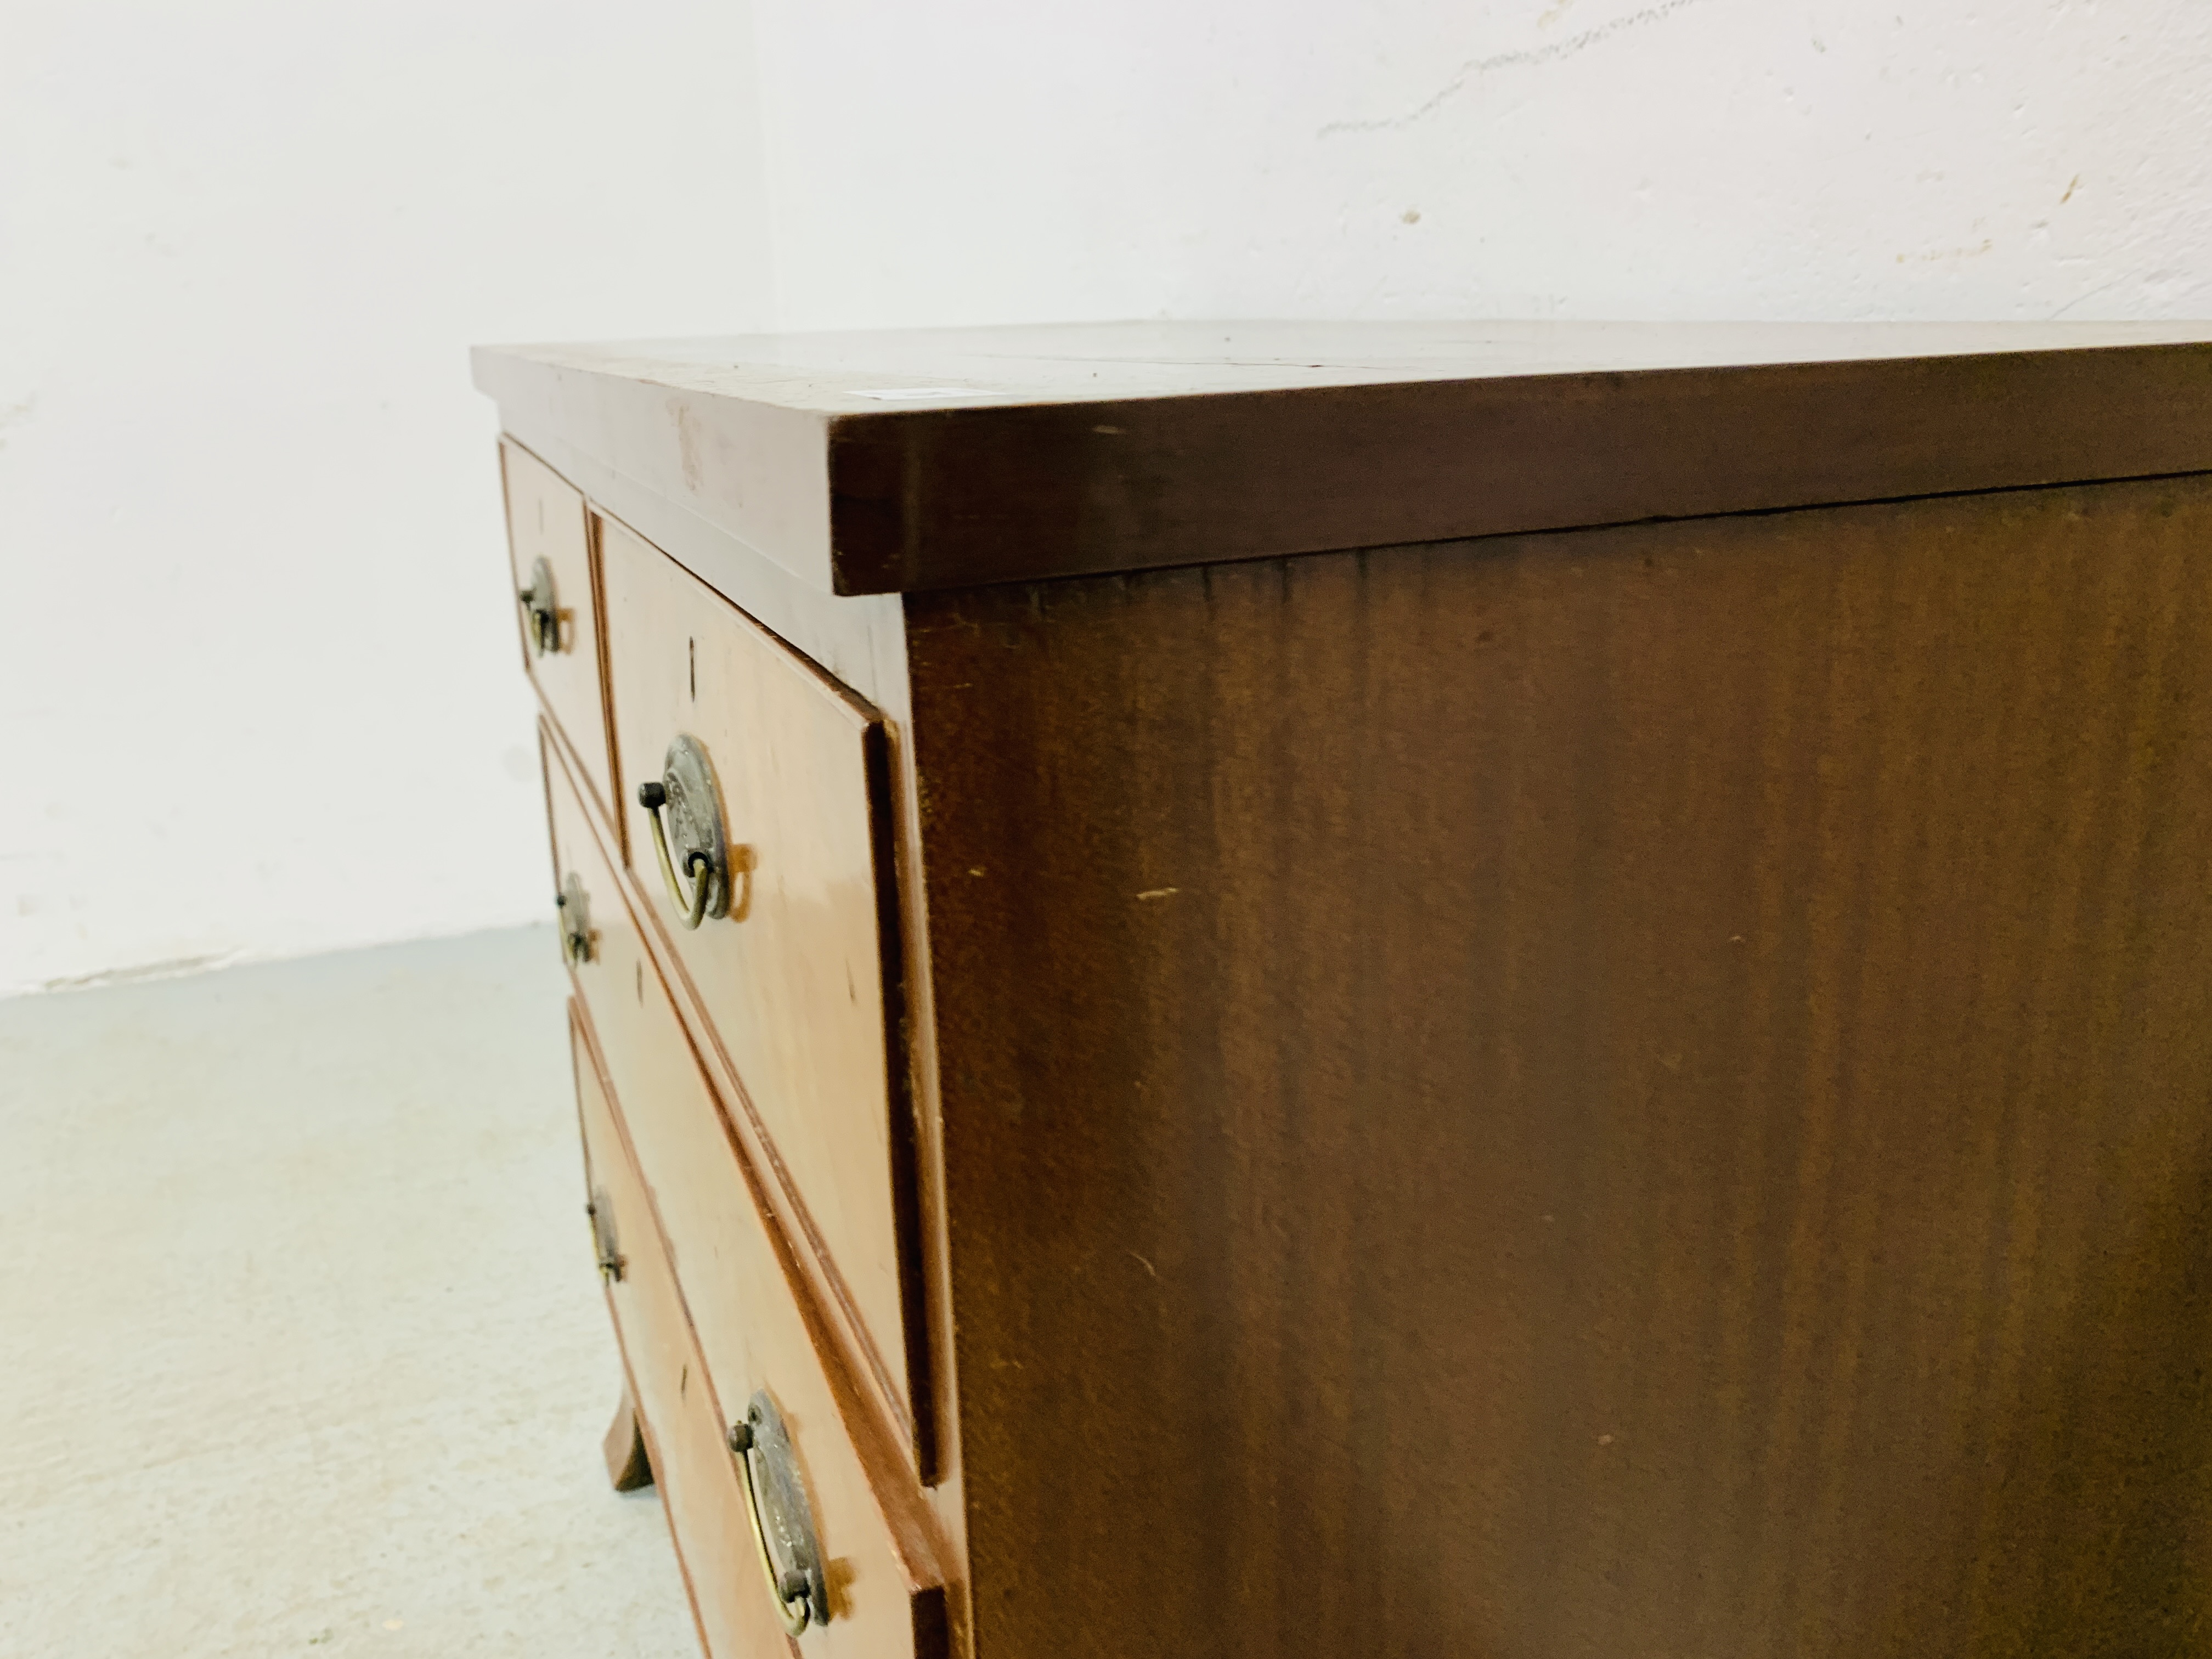 AN EARLY C19TH EDWARDIAN TWO OVER TWO DRAWER CHEST WITH BRASS HANDLES - W 91CM. D 44CM. H 80CM. - Image 7 of 8